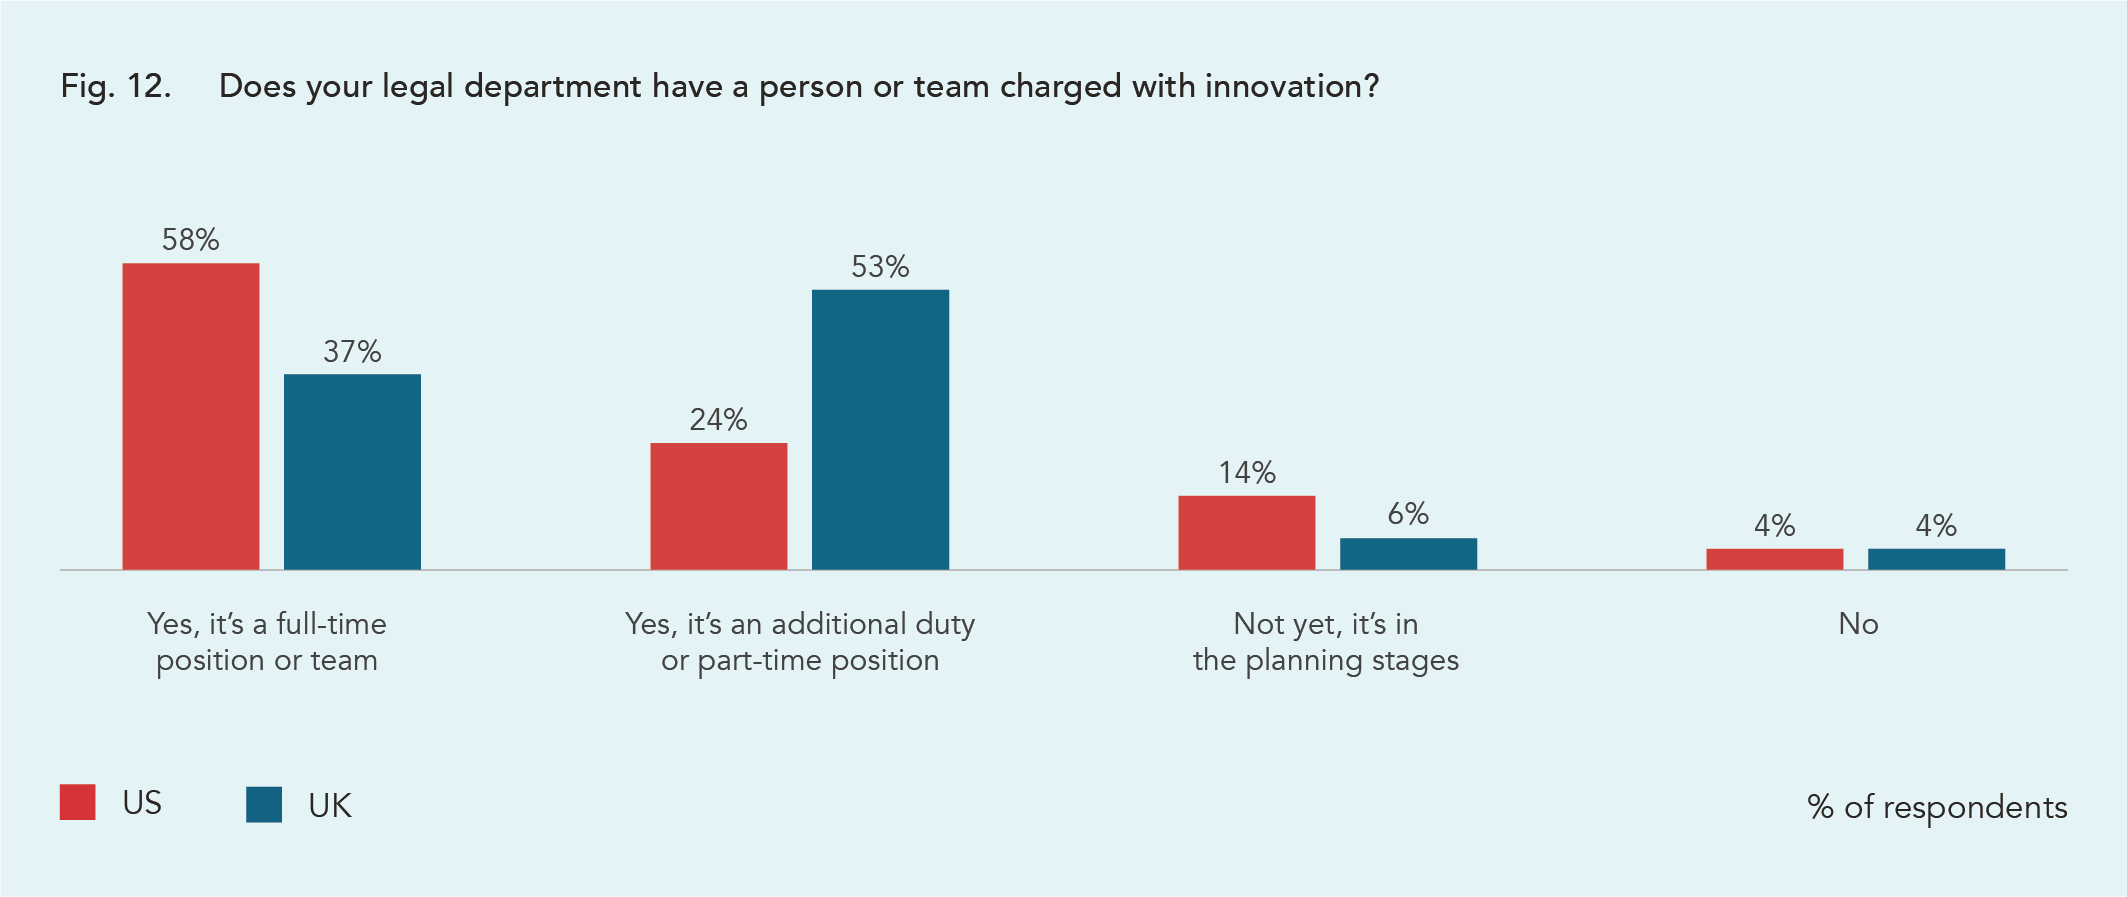 Does your legal department have a person or team charged with innovation?